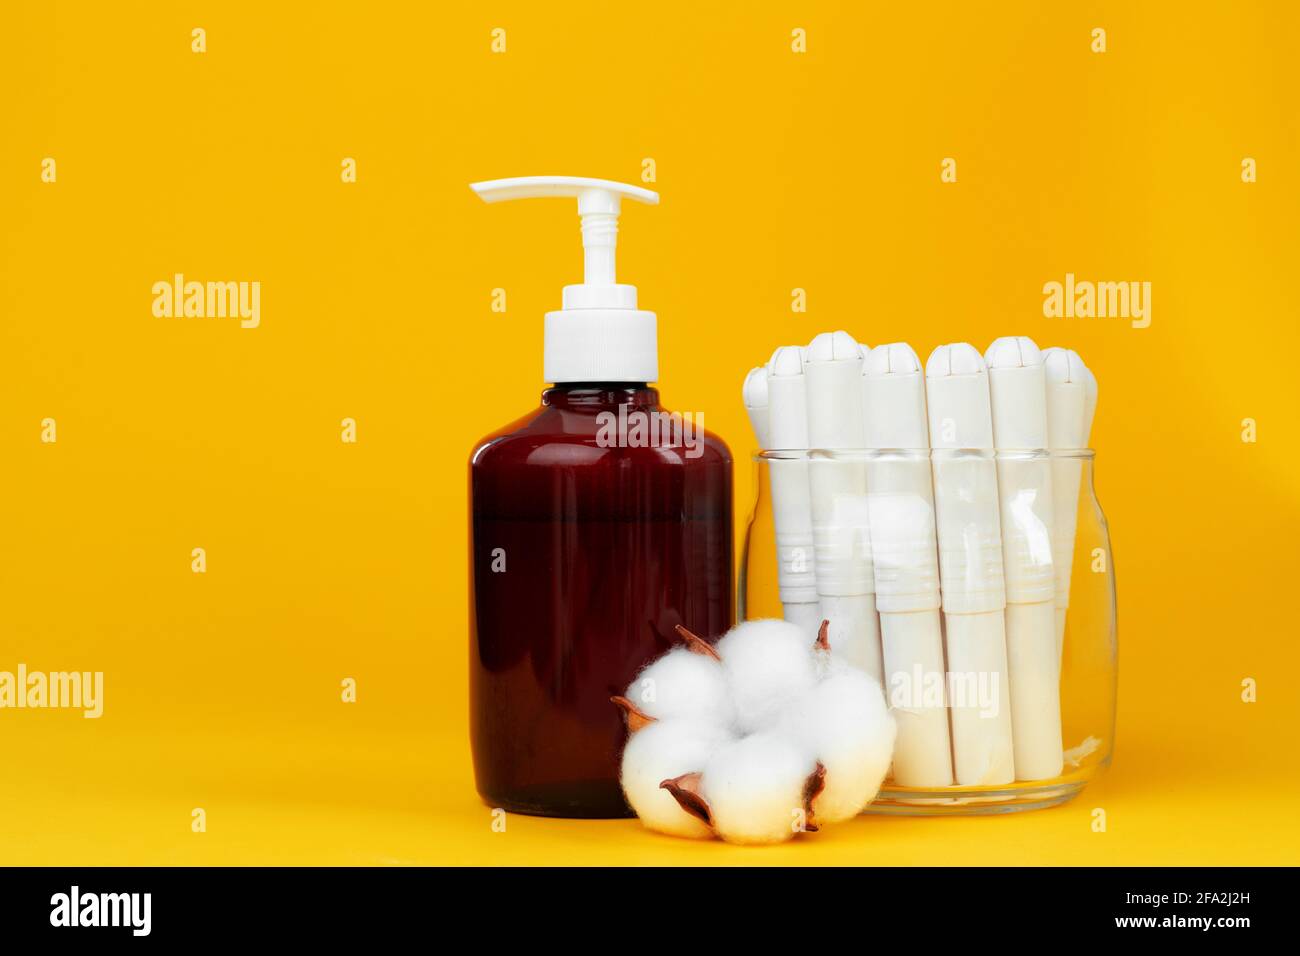 Cluj Napoca, Romania - jun 10, 2021: Packages of O.B. tampons, a global  brand of feminine hygiene products or personal care products used by women  dur Stock Photo - Alamy